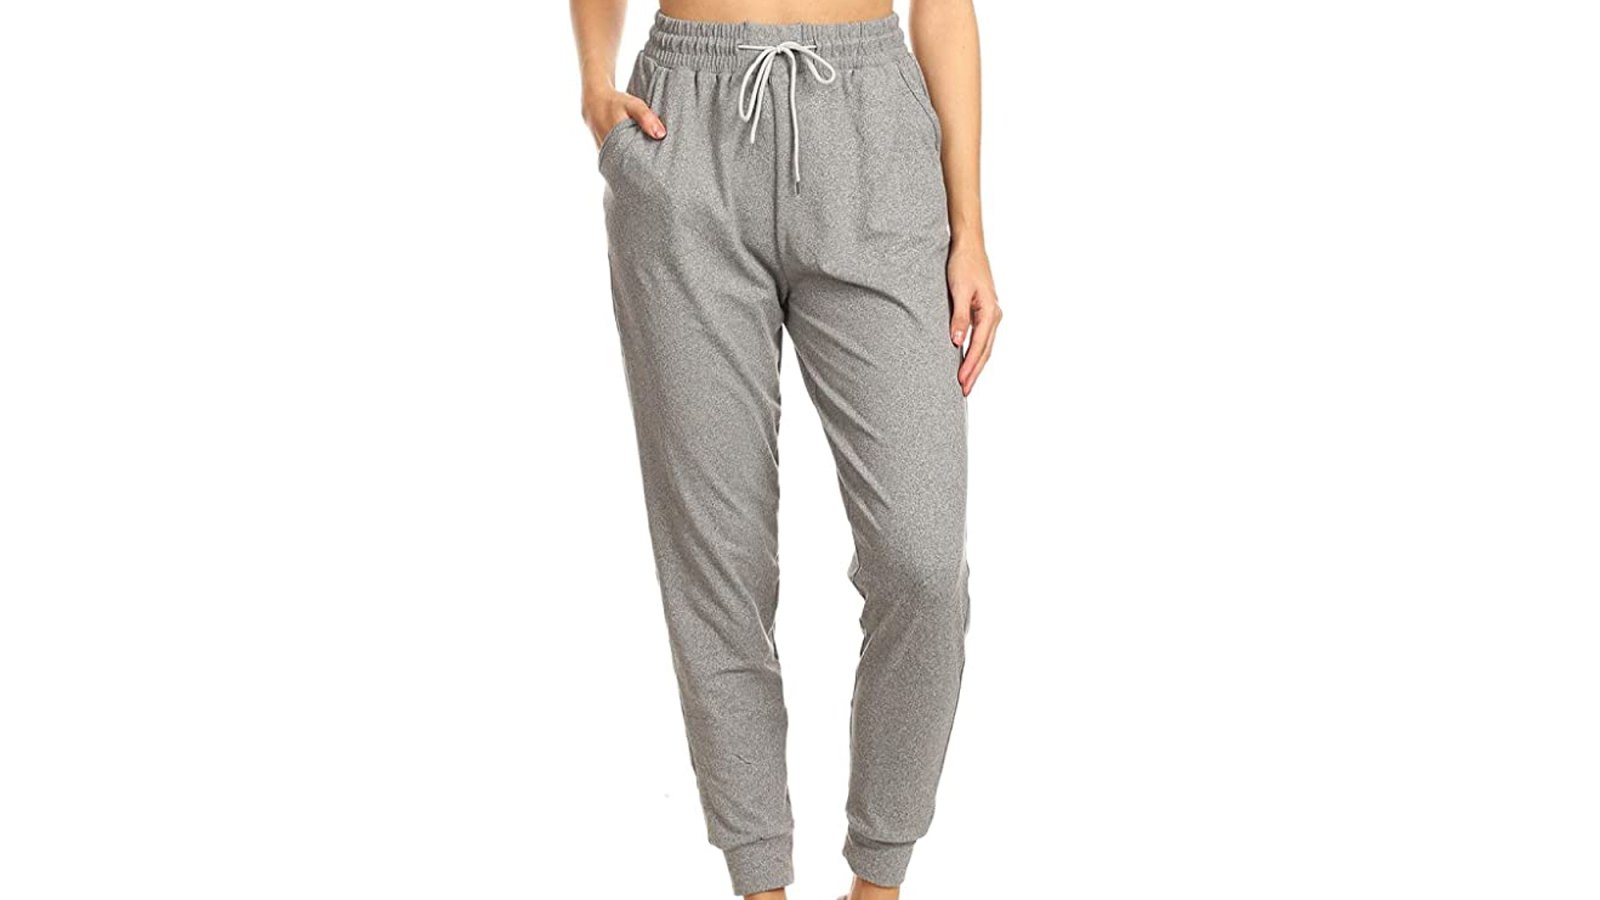 Leggings Depot Joggers Are Seriously Popular on Amazon | Us Weekly